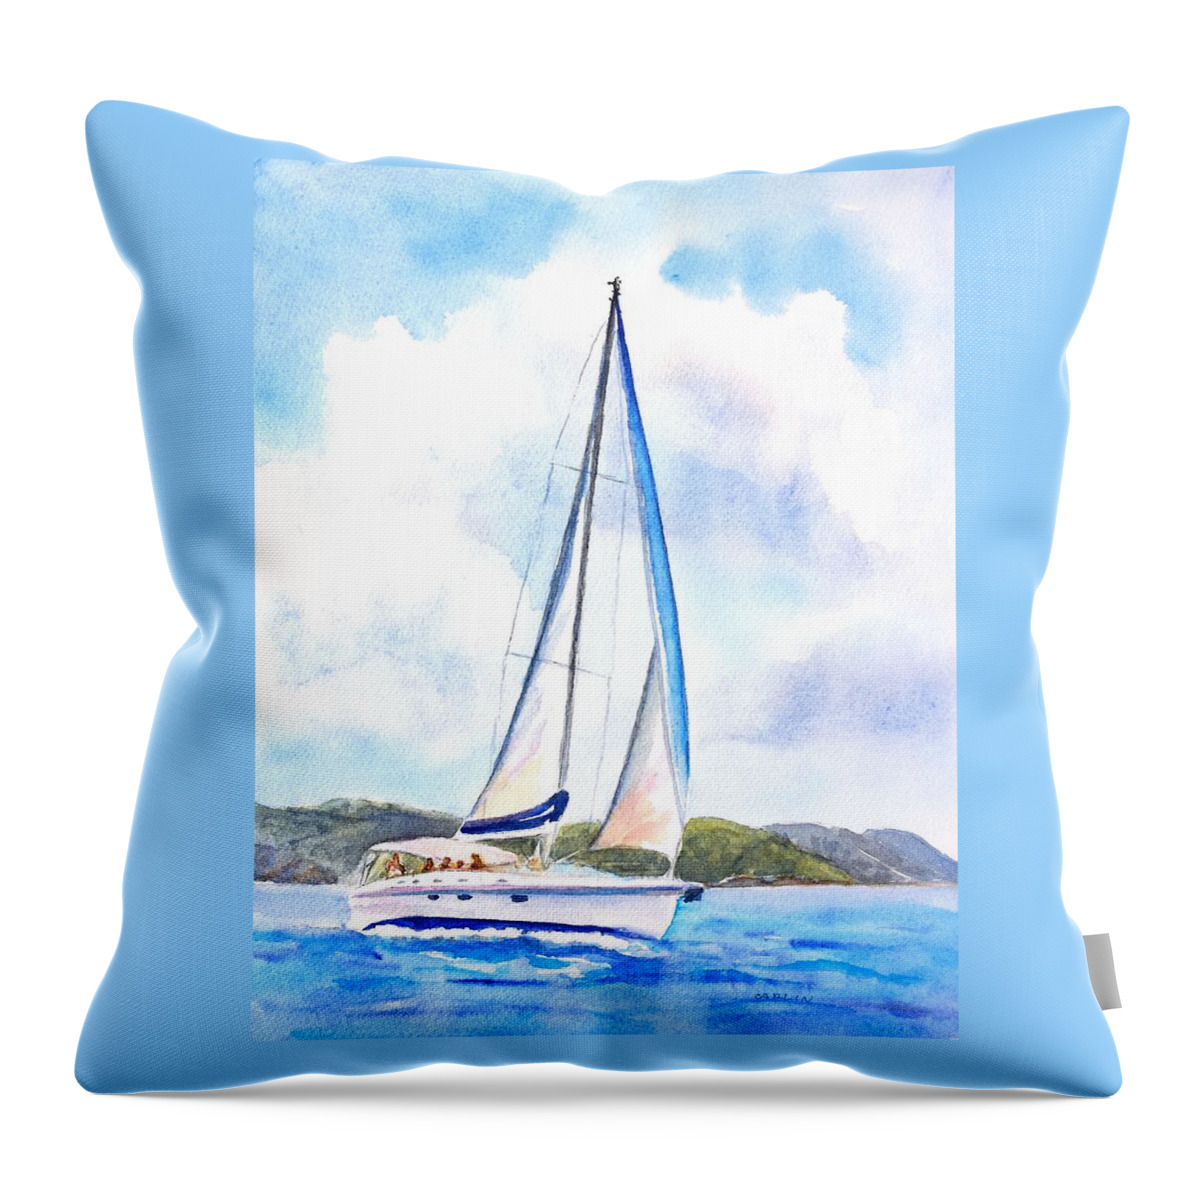 Nautical Throw Pillow featuring the painting Sailing the Islands 2 by Carlin Blahnik CarlinArtWatercolor